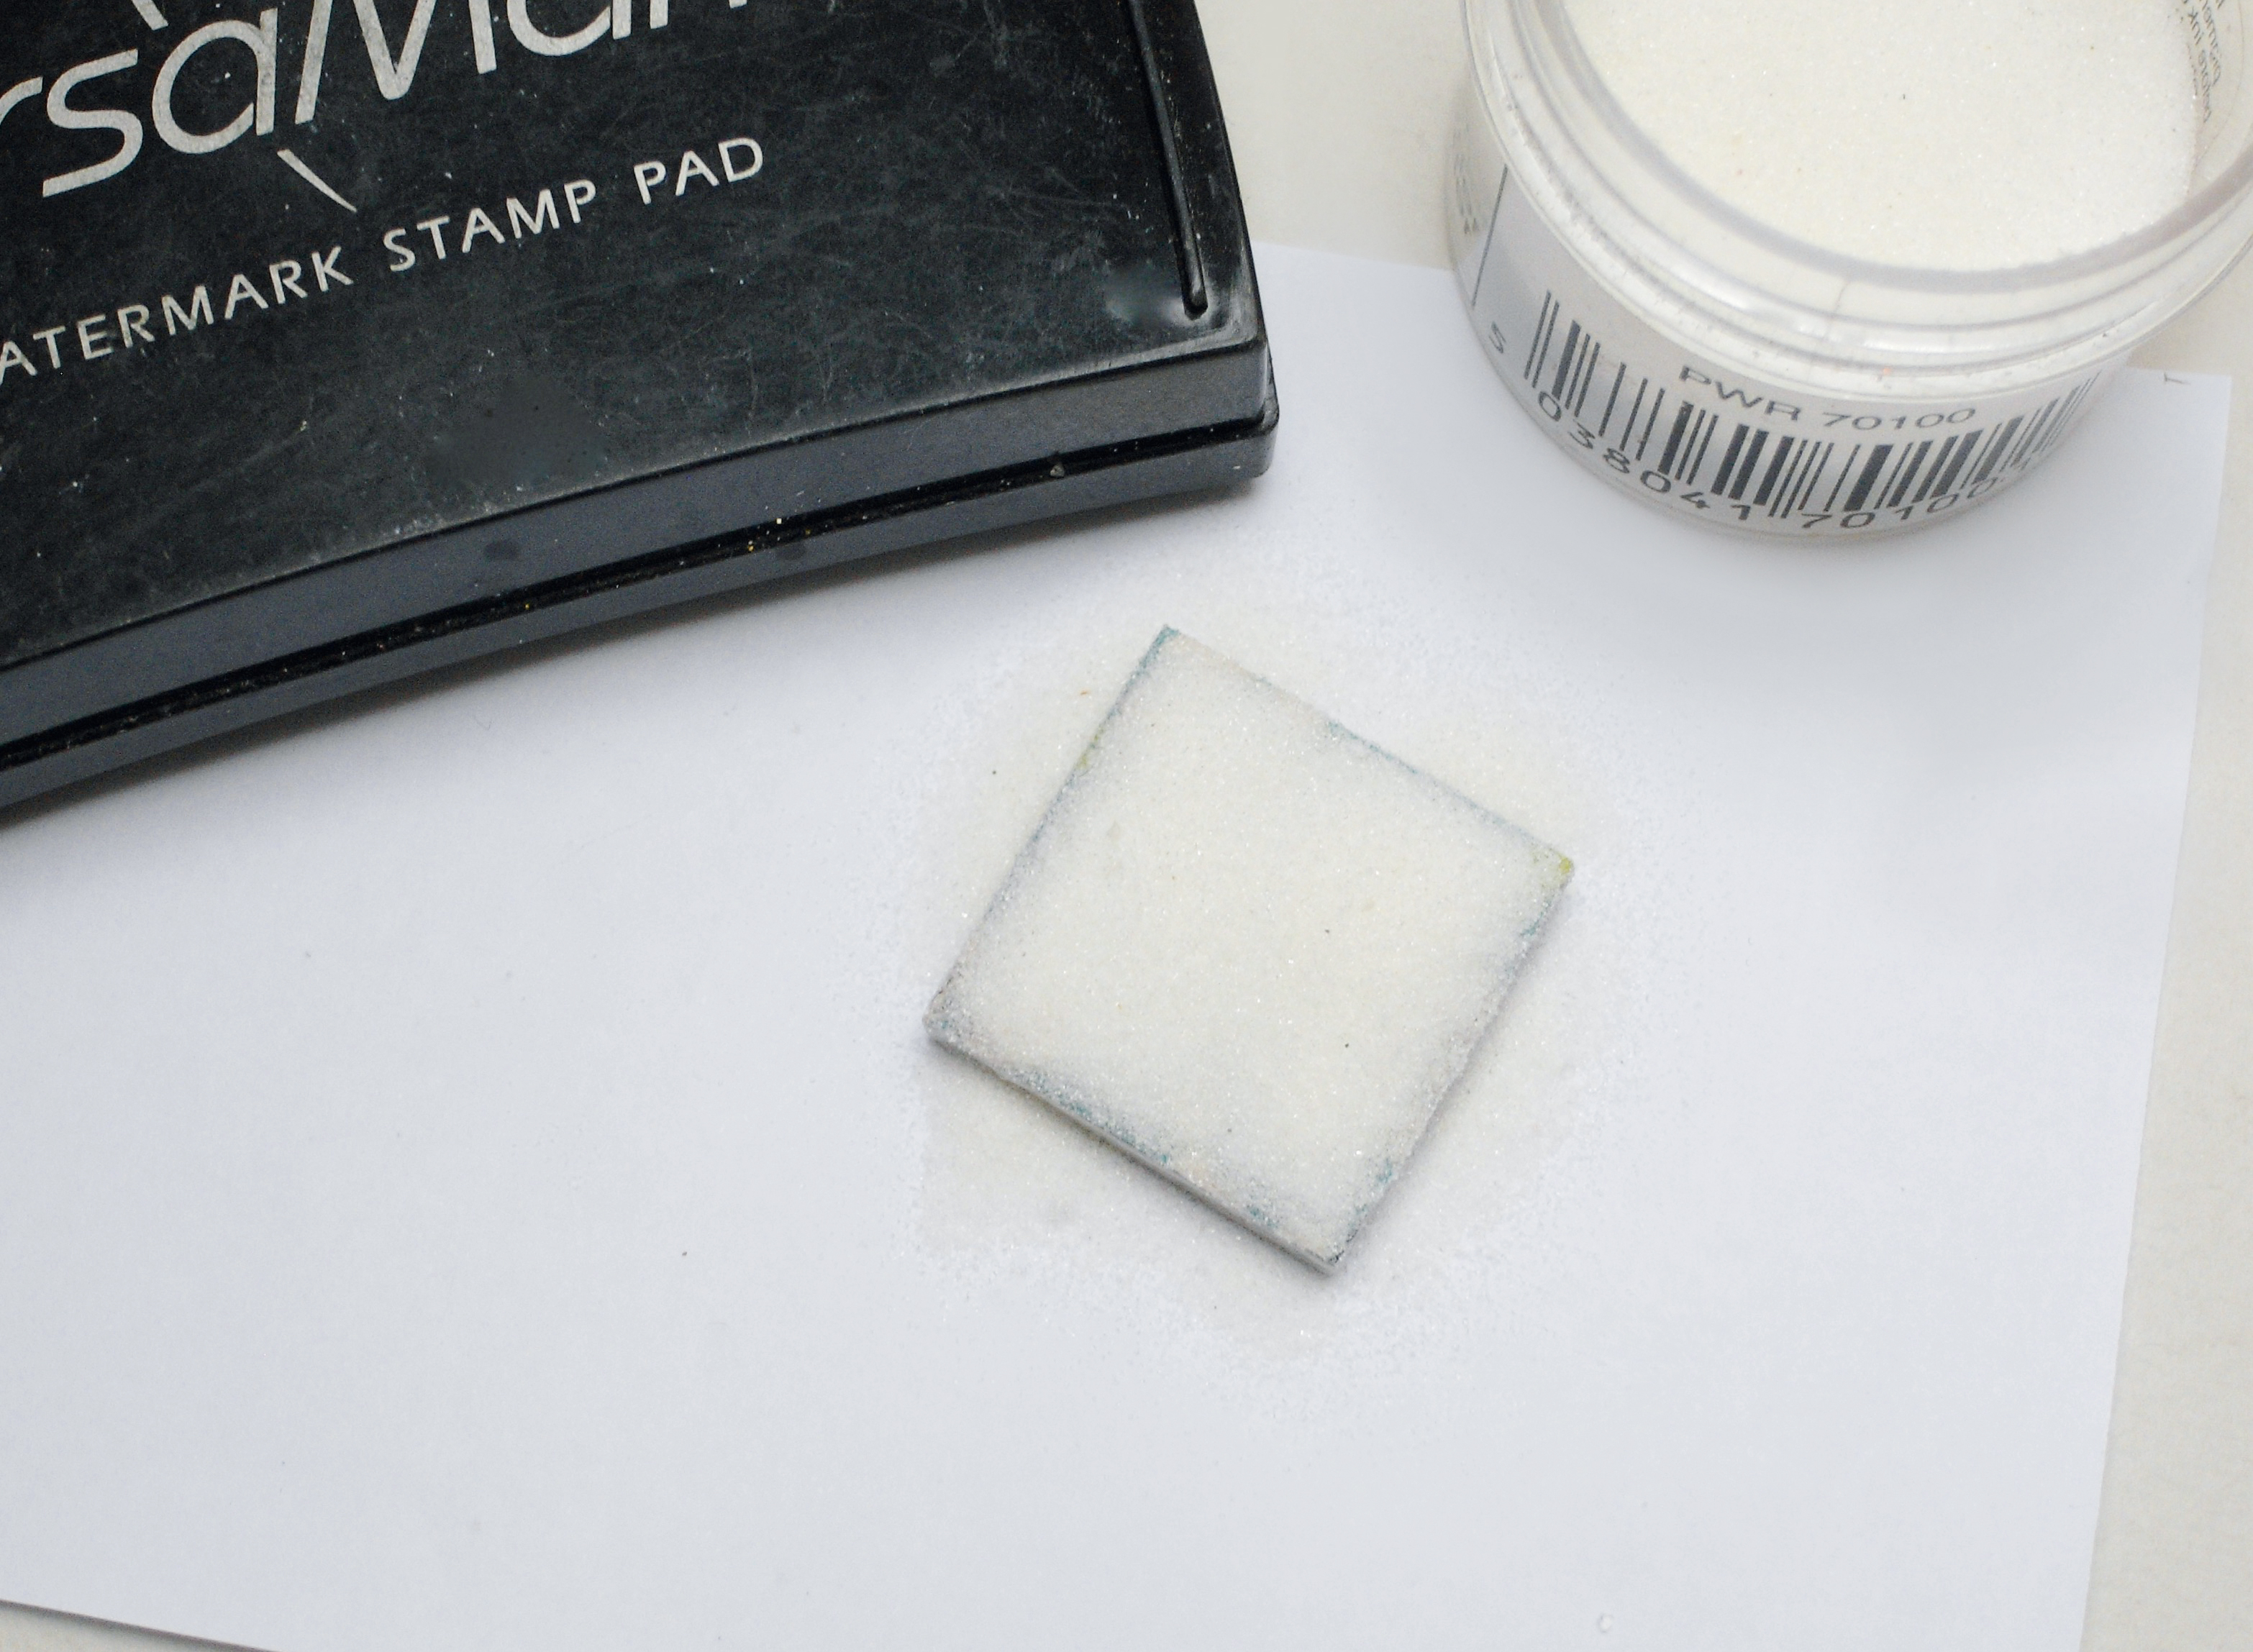 How to make a square pendant necklace